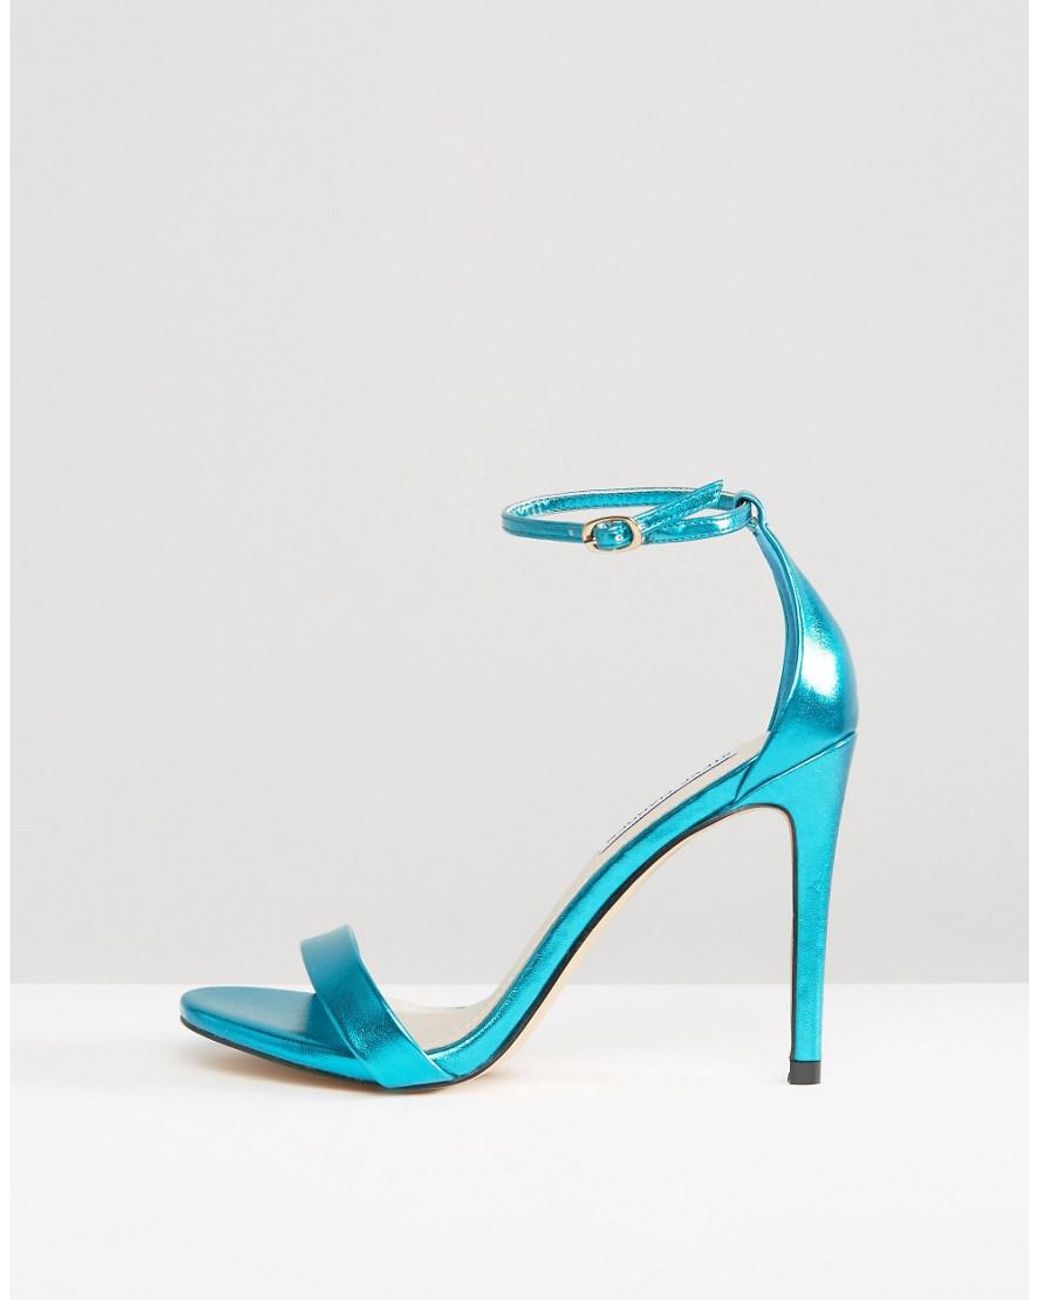 Steve Madden Stecy Metallic Barely There Heeled Sandals in Blue | Lyst